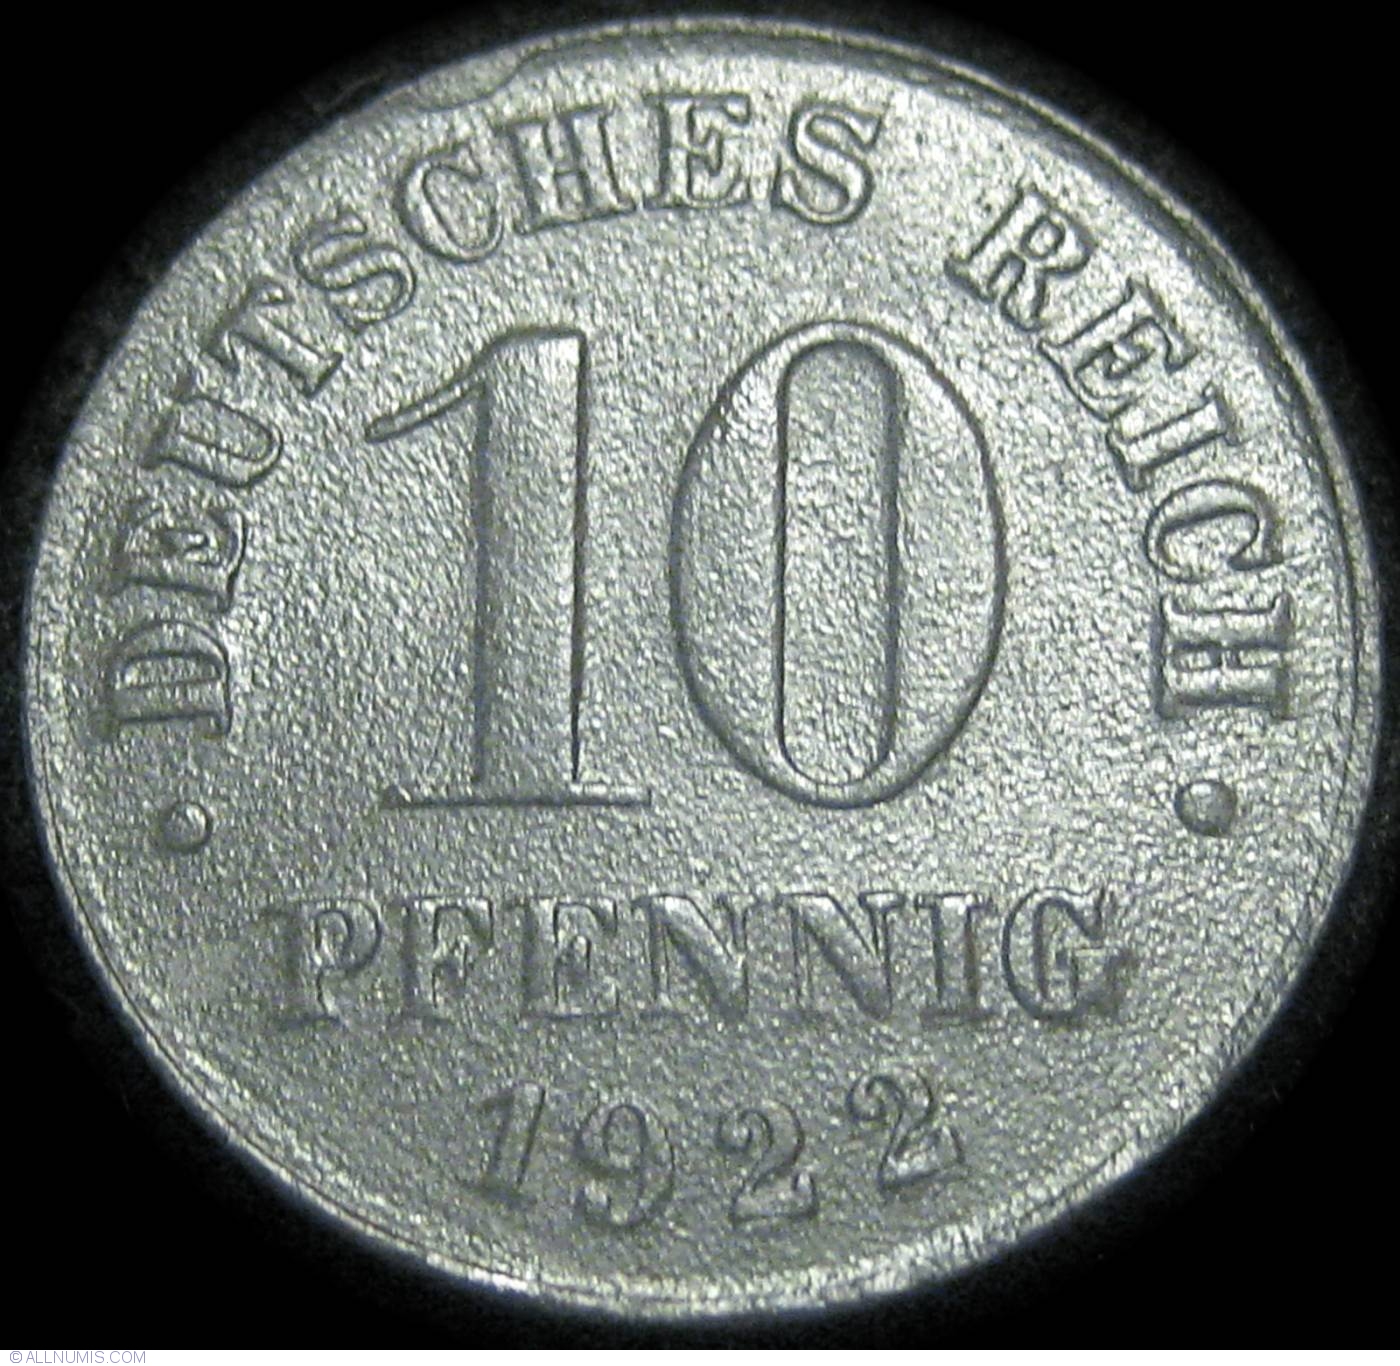 10 Pfennig 1922, Imperial Coinage (1919-1922) - Germany - Coin - 23214